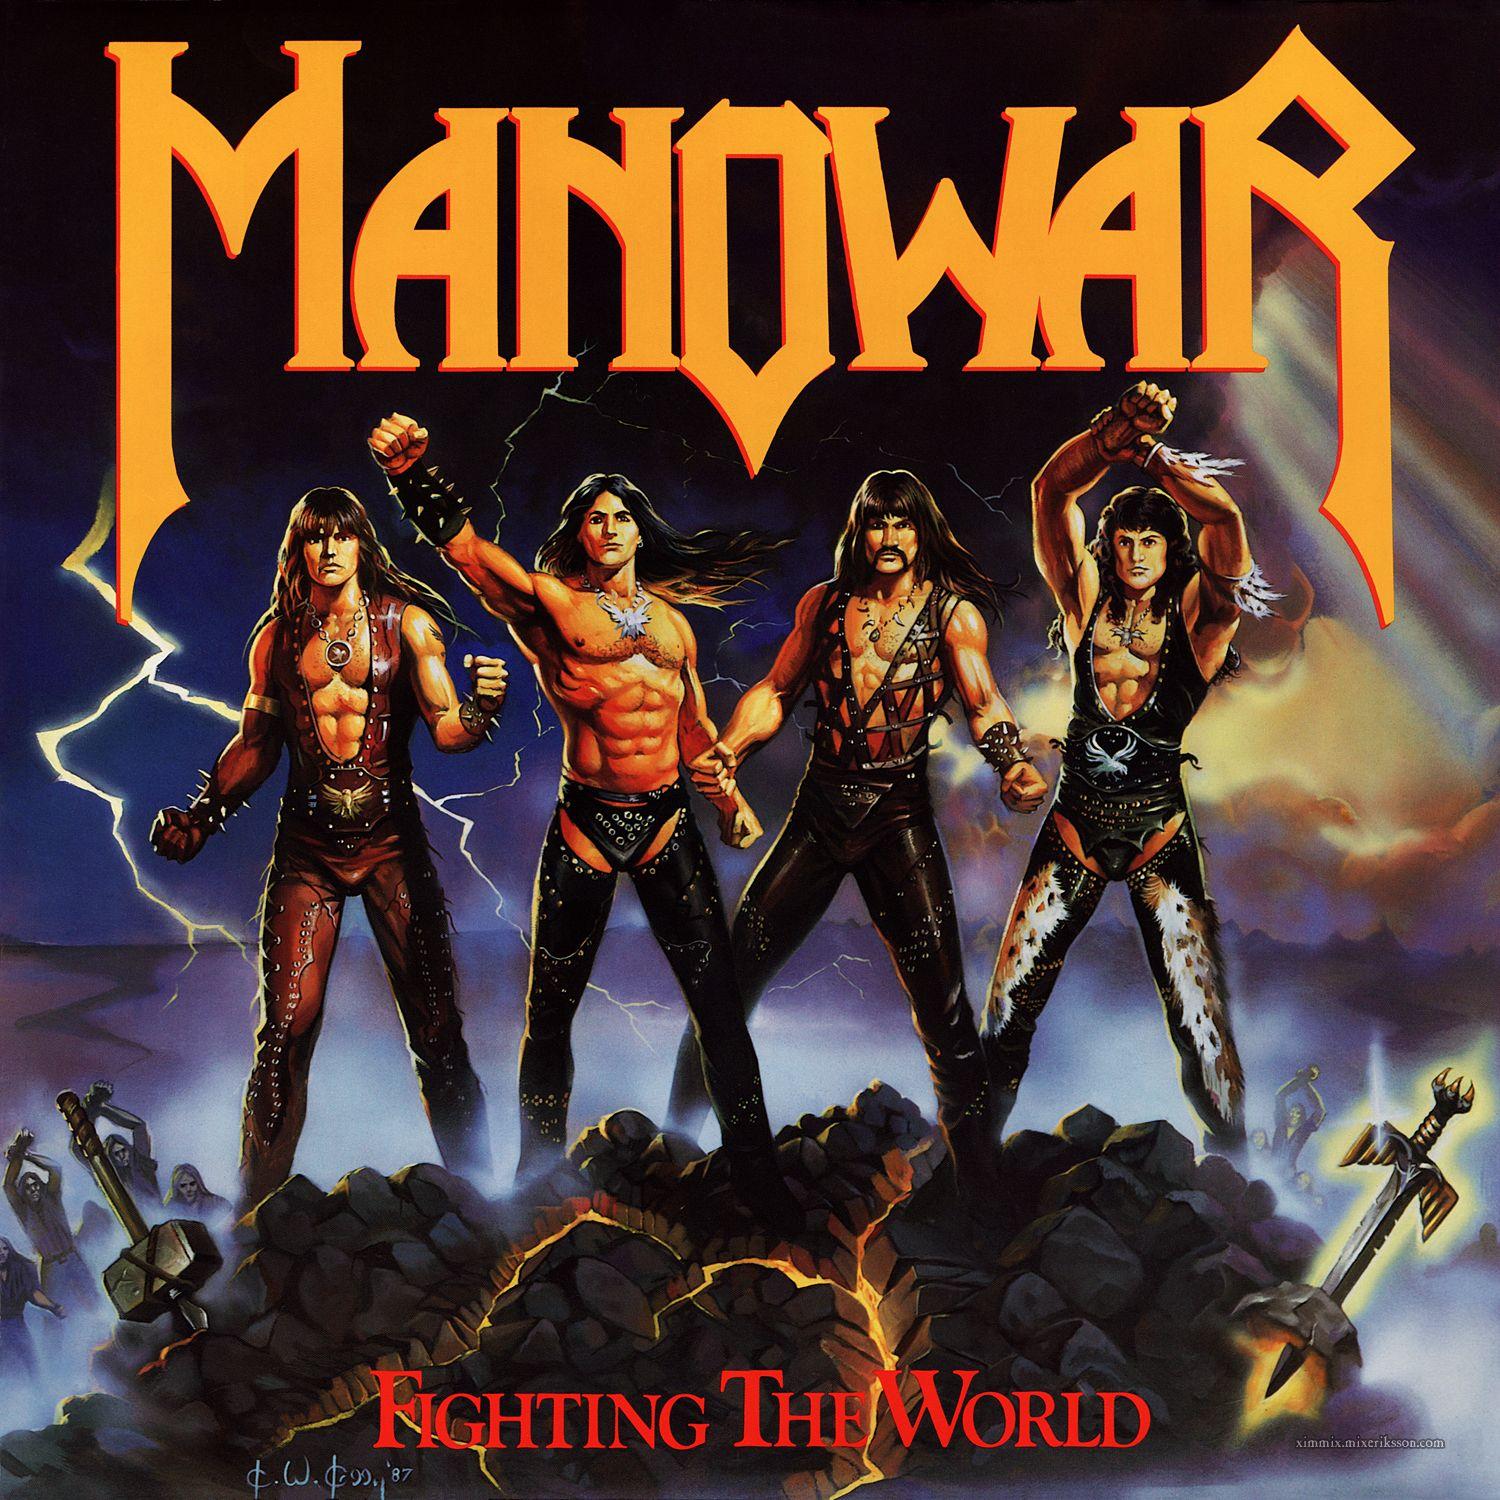 has anyone else covered manowar warriors of the world